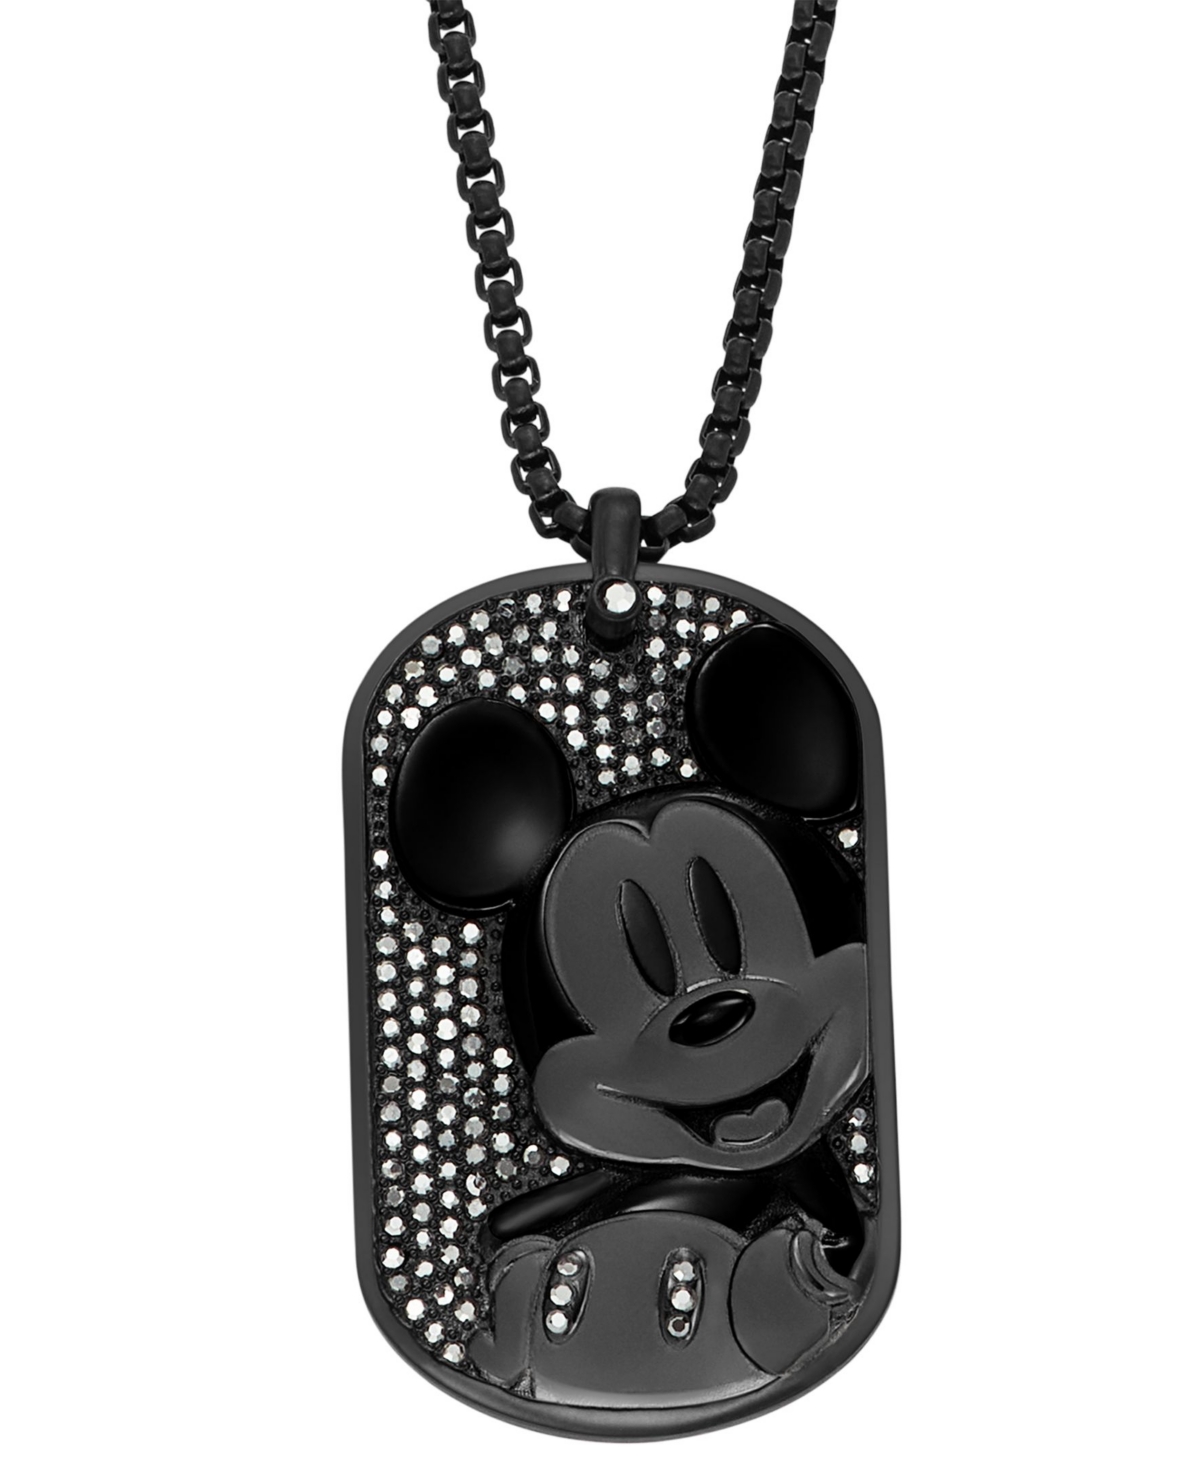 Disney x Fossil Special Edition Men's Hematite Crystal Mickey Mouse Necklace - Black